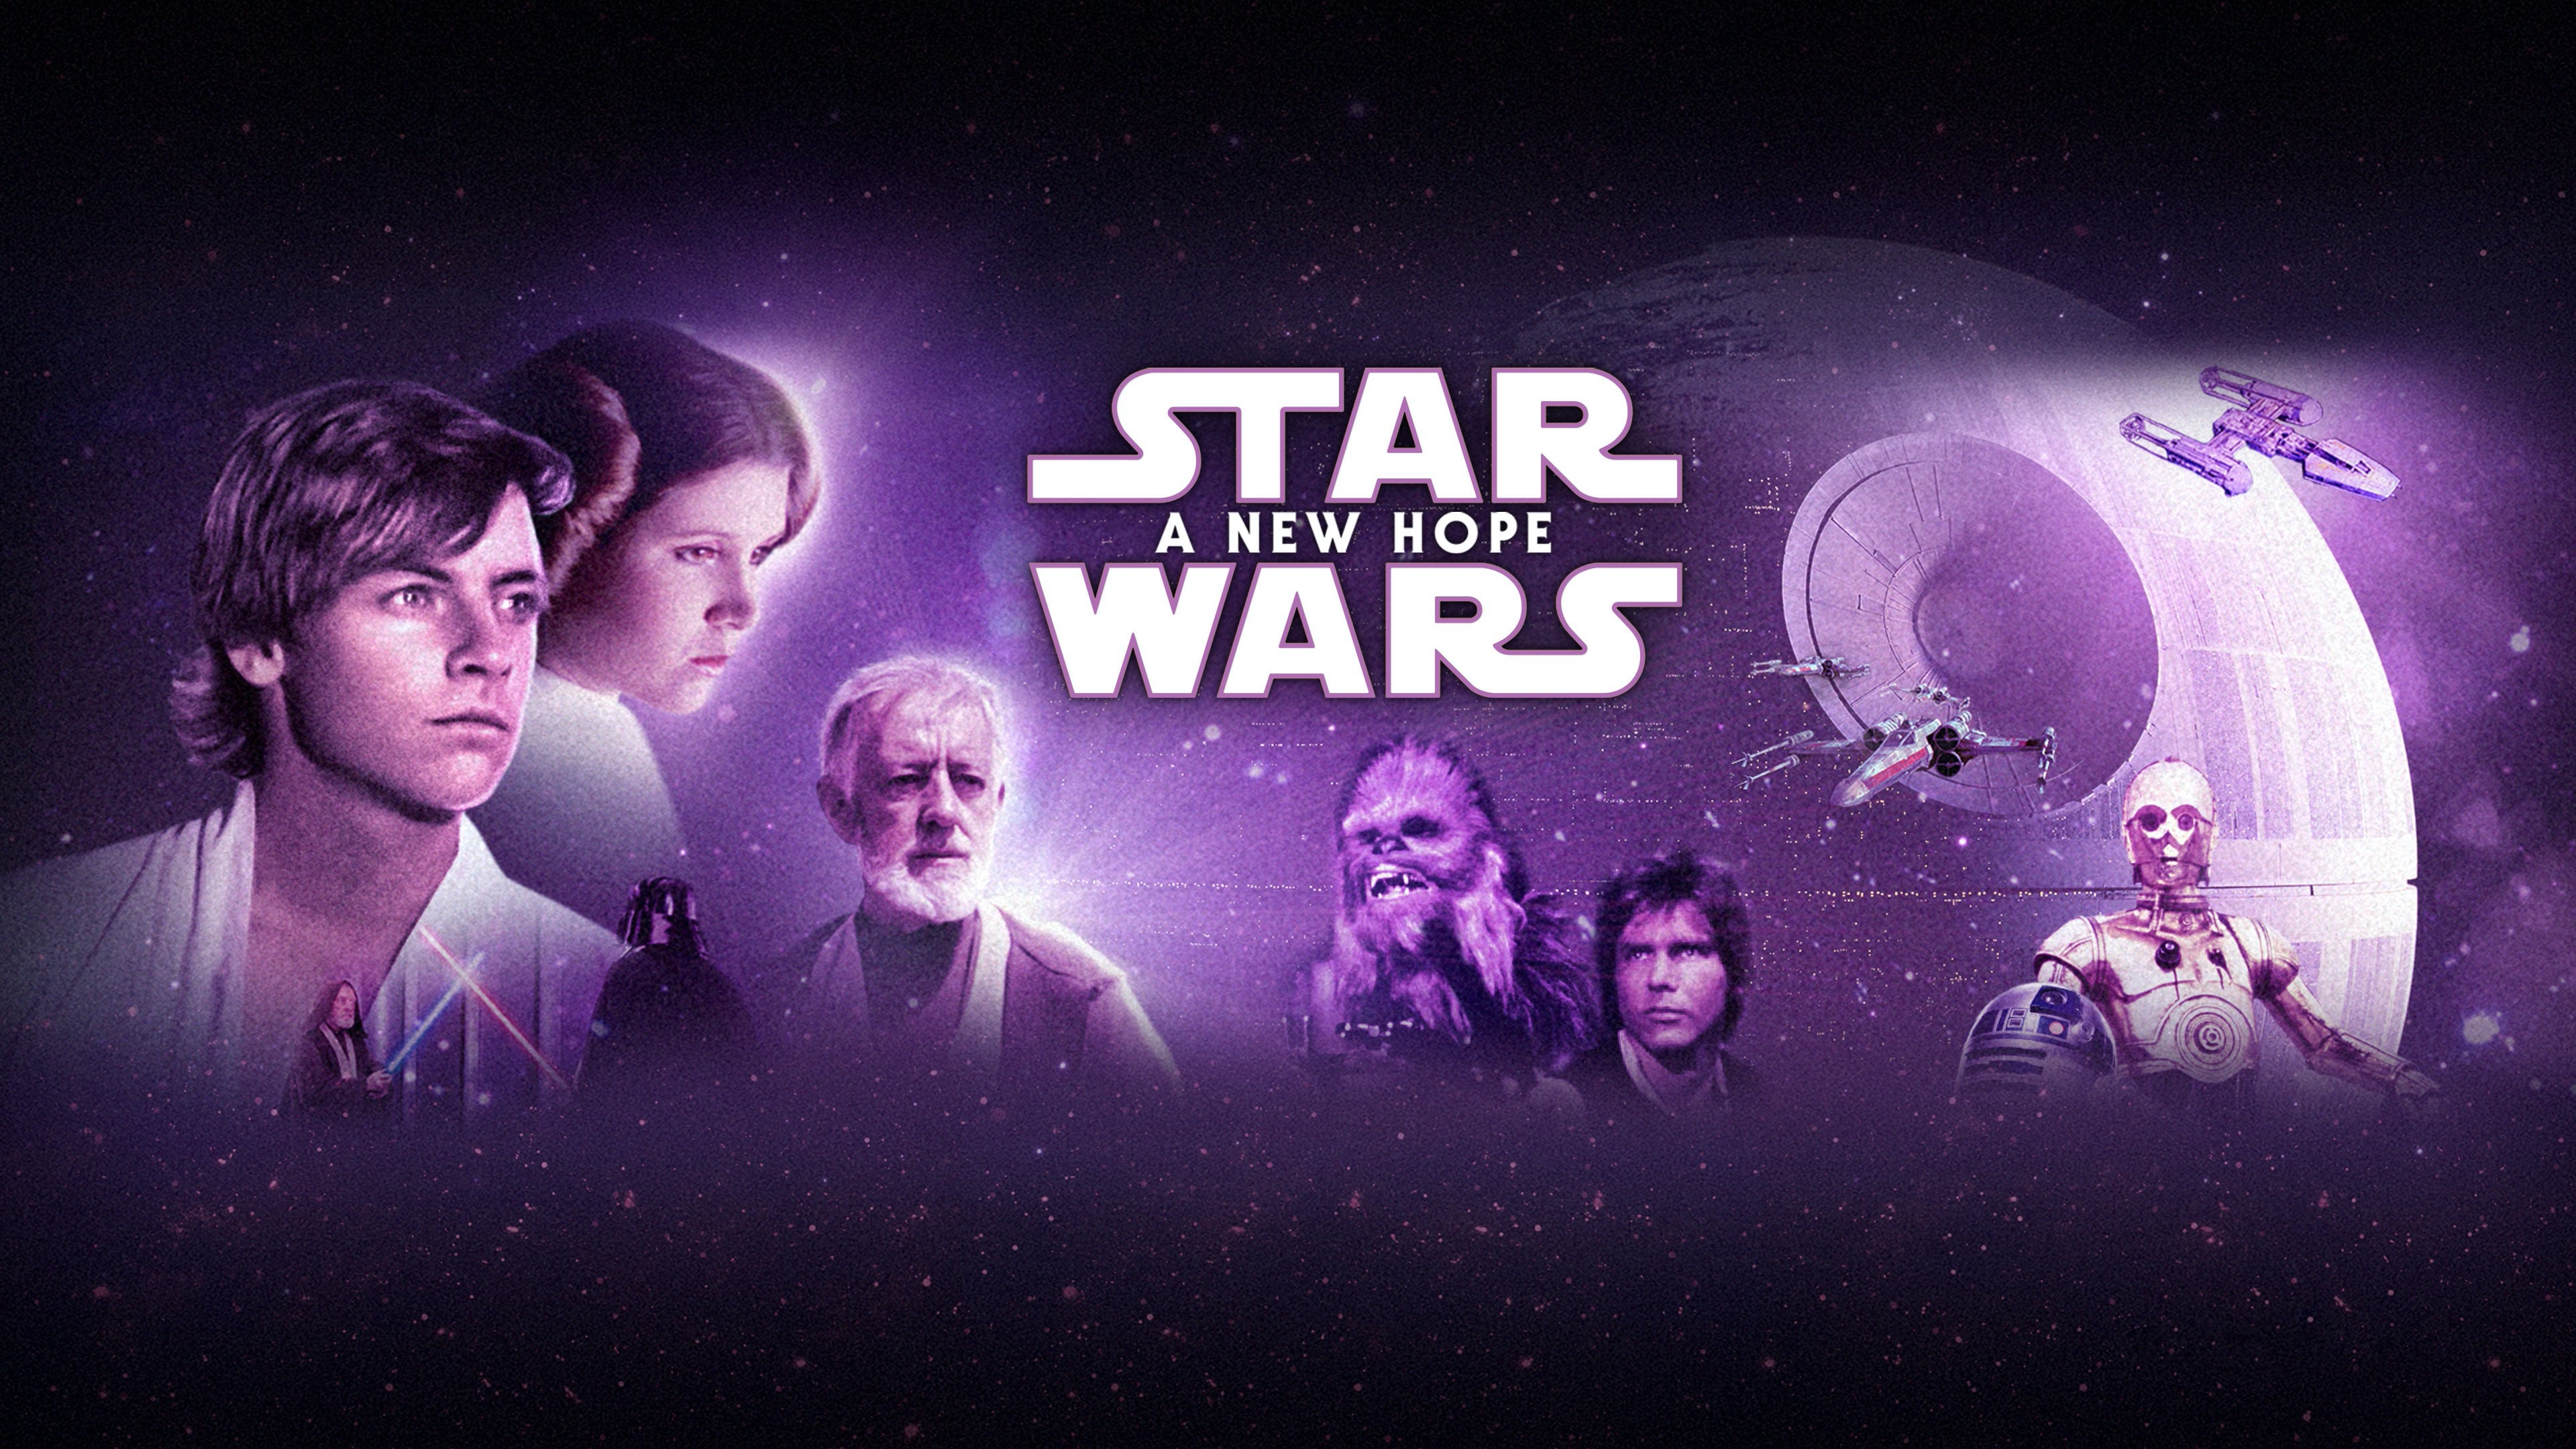 Star Wars Episode Iv: A New Hope Wallpapers